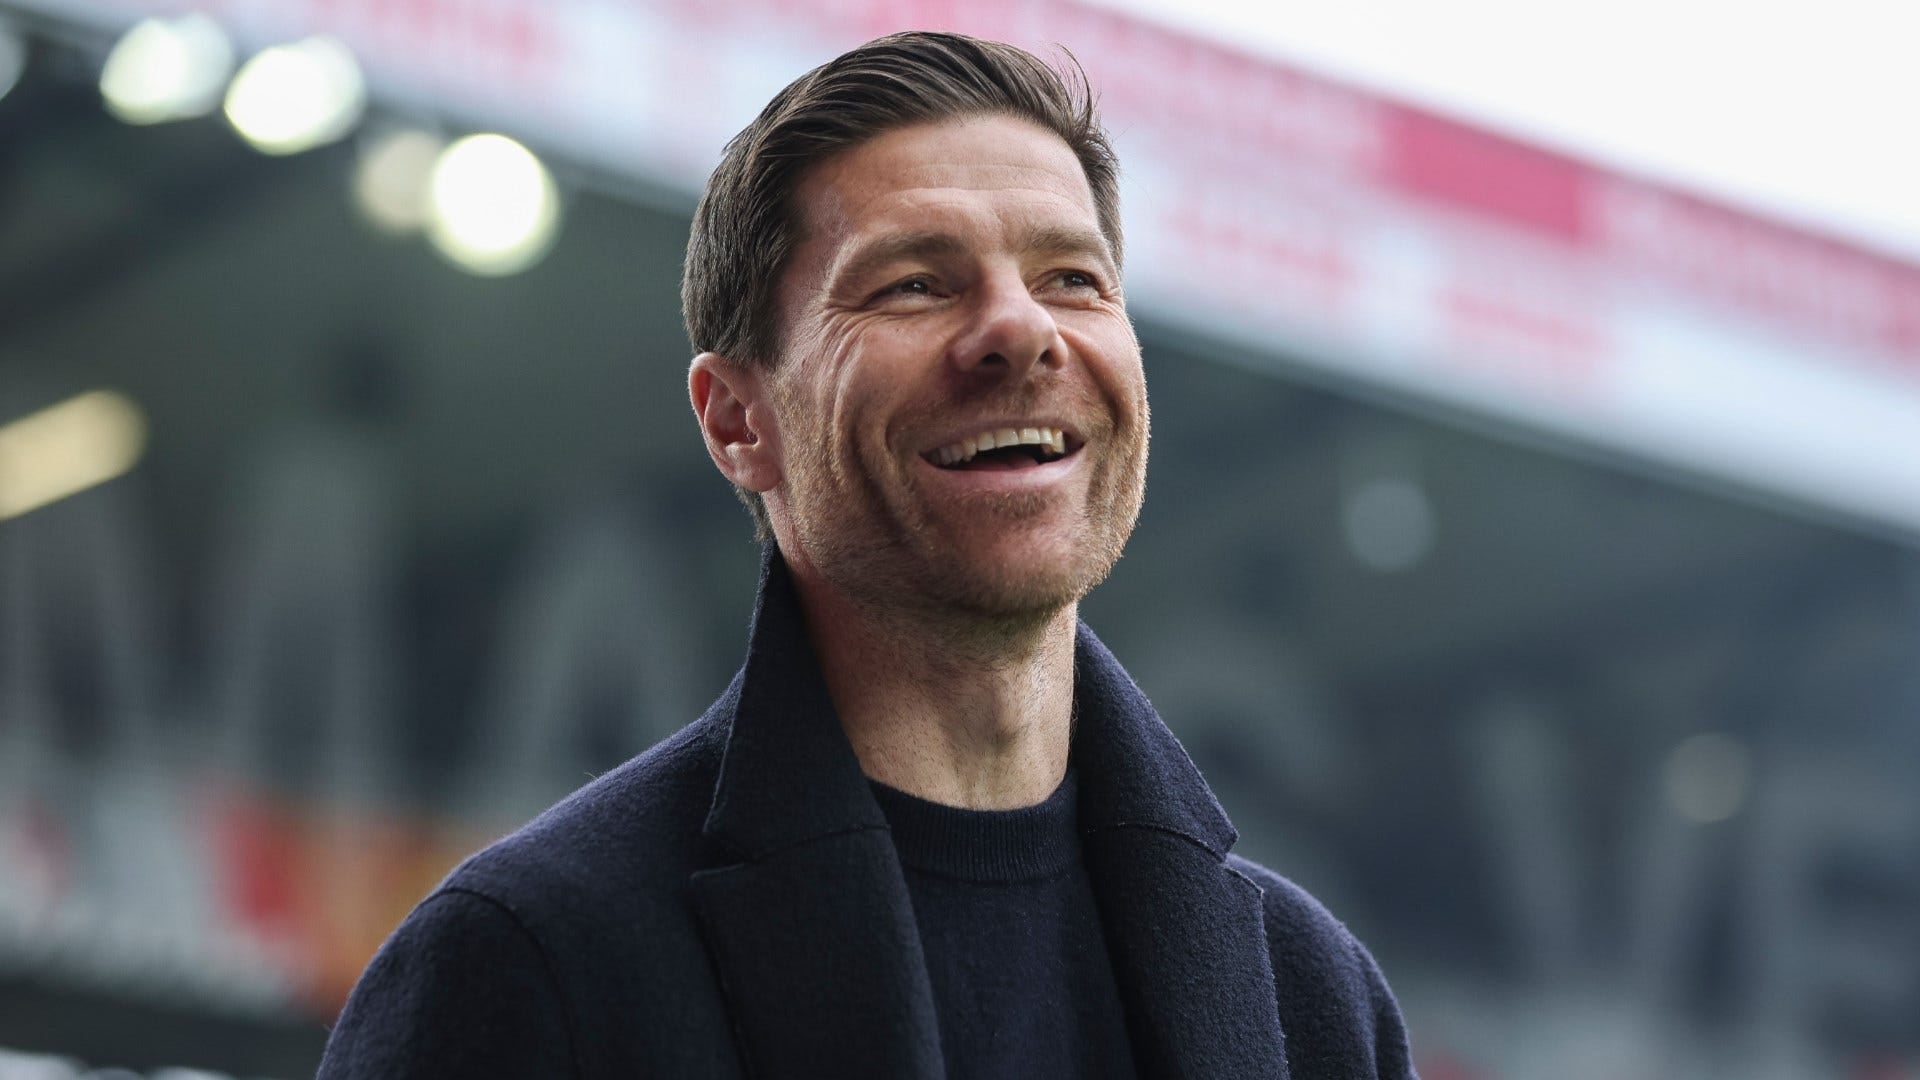 Liverpool could sign record-breaking Belgium star or Xabi Alonso